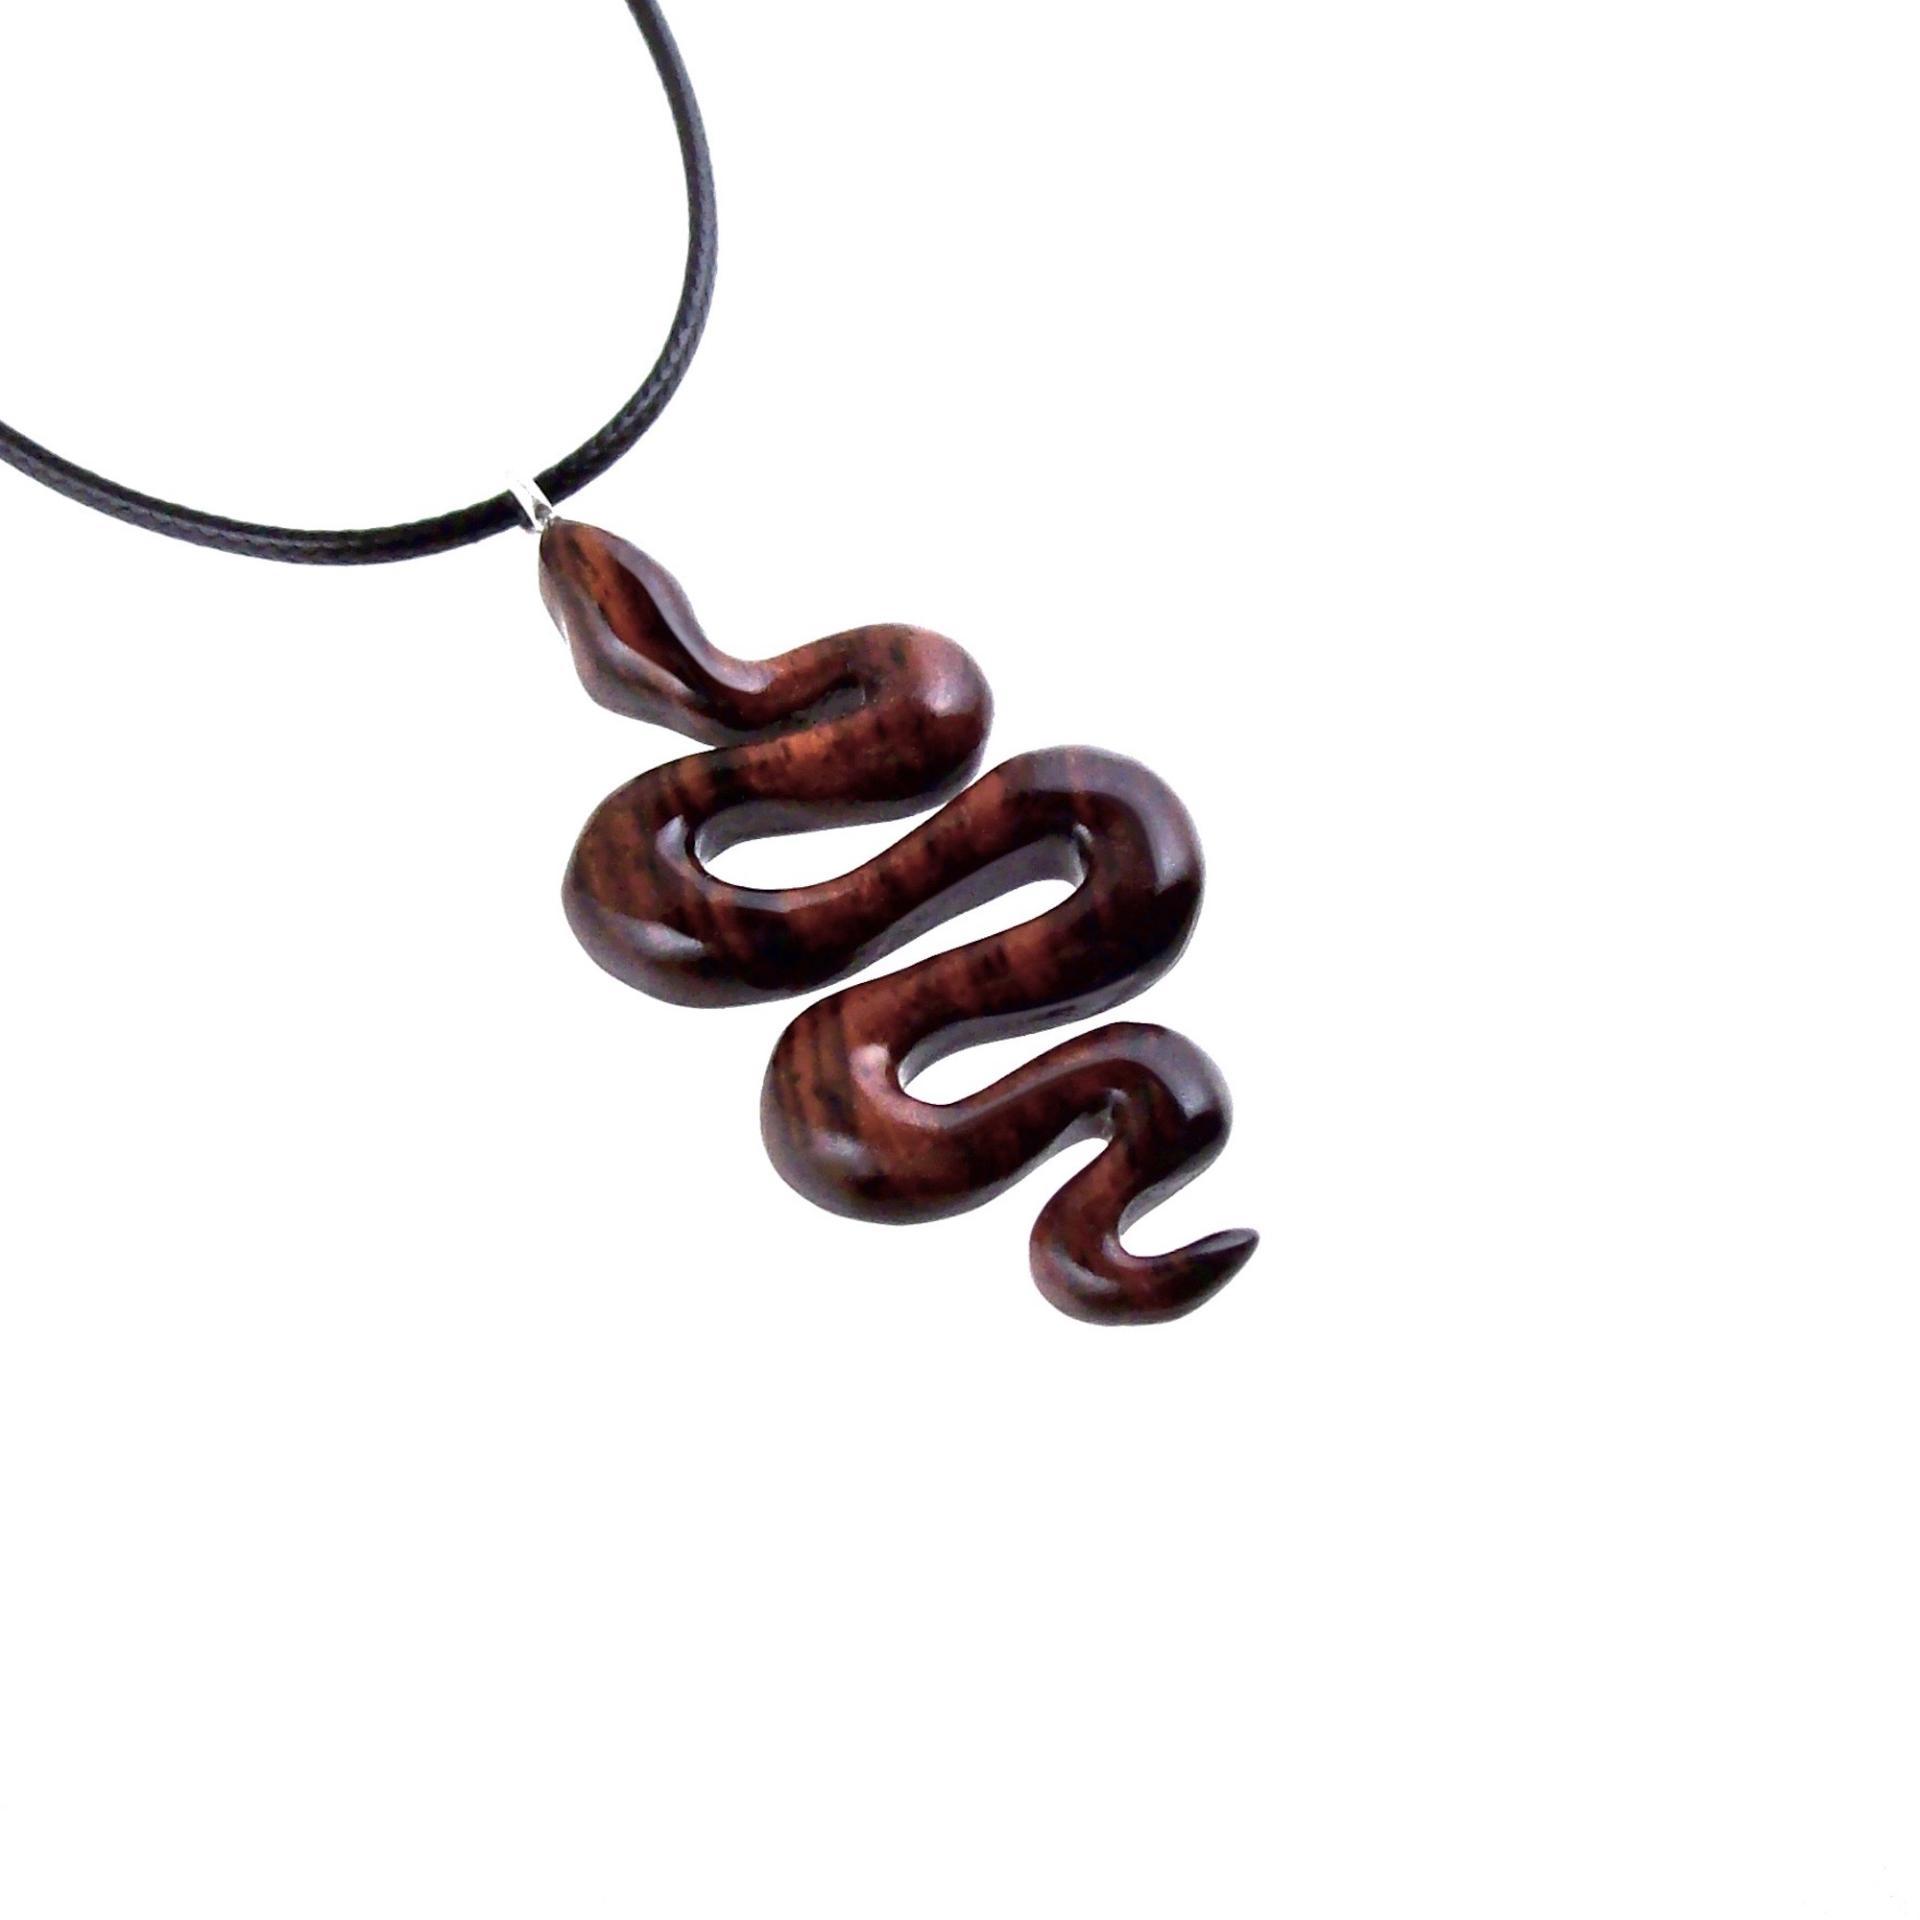 Snake Necklace for Men or Women, Hand Carved Wooden Snake Pendant, Wood Serpent Necklace, Totem Reptile Jewelry